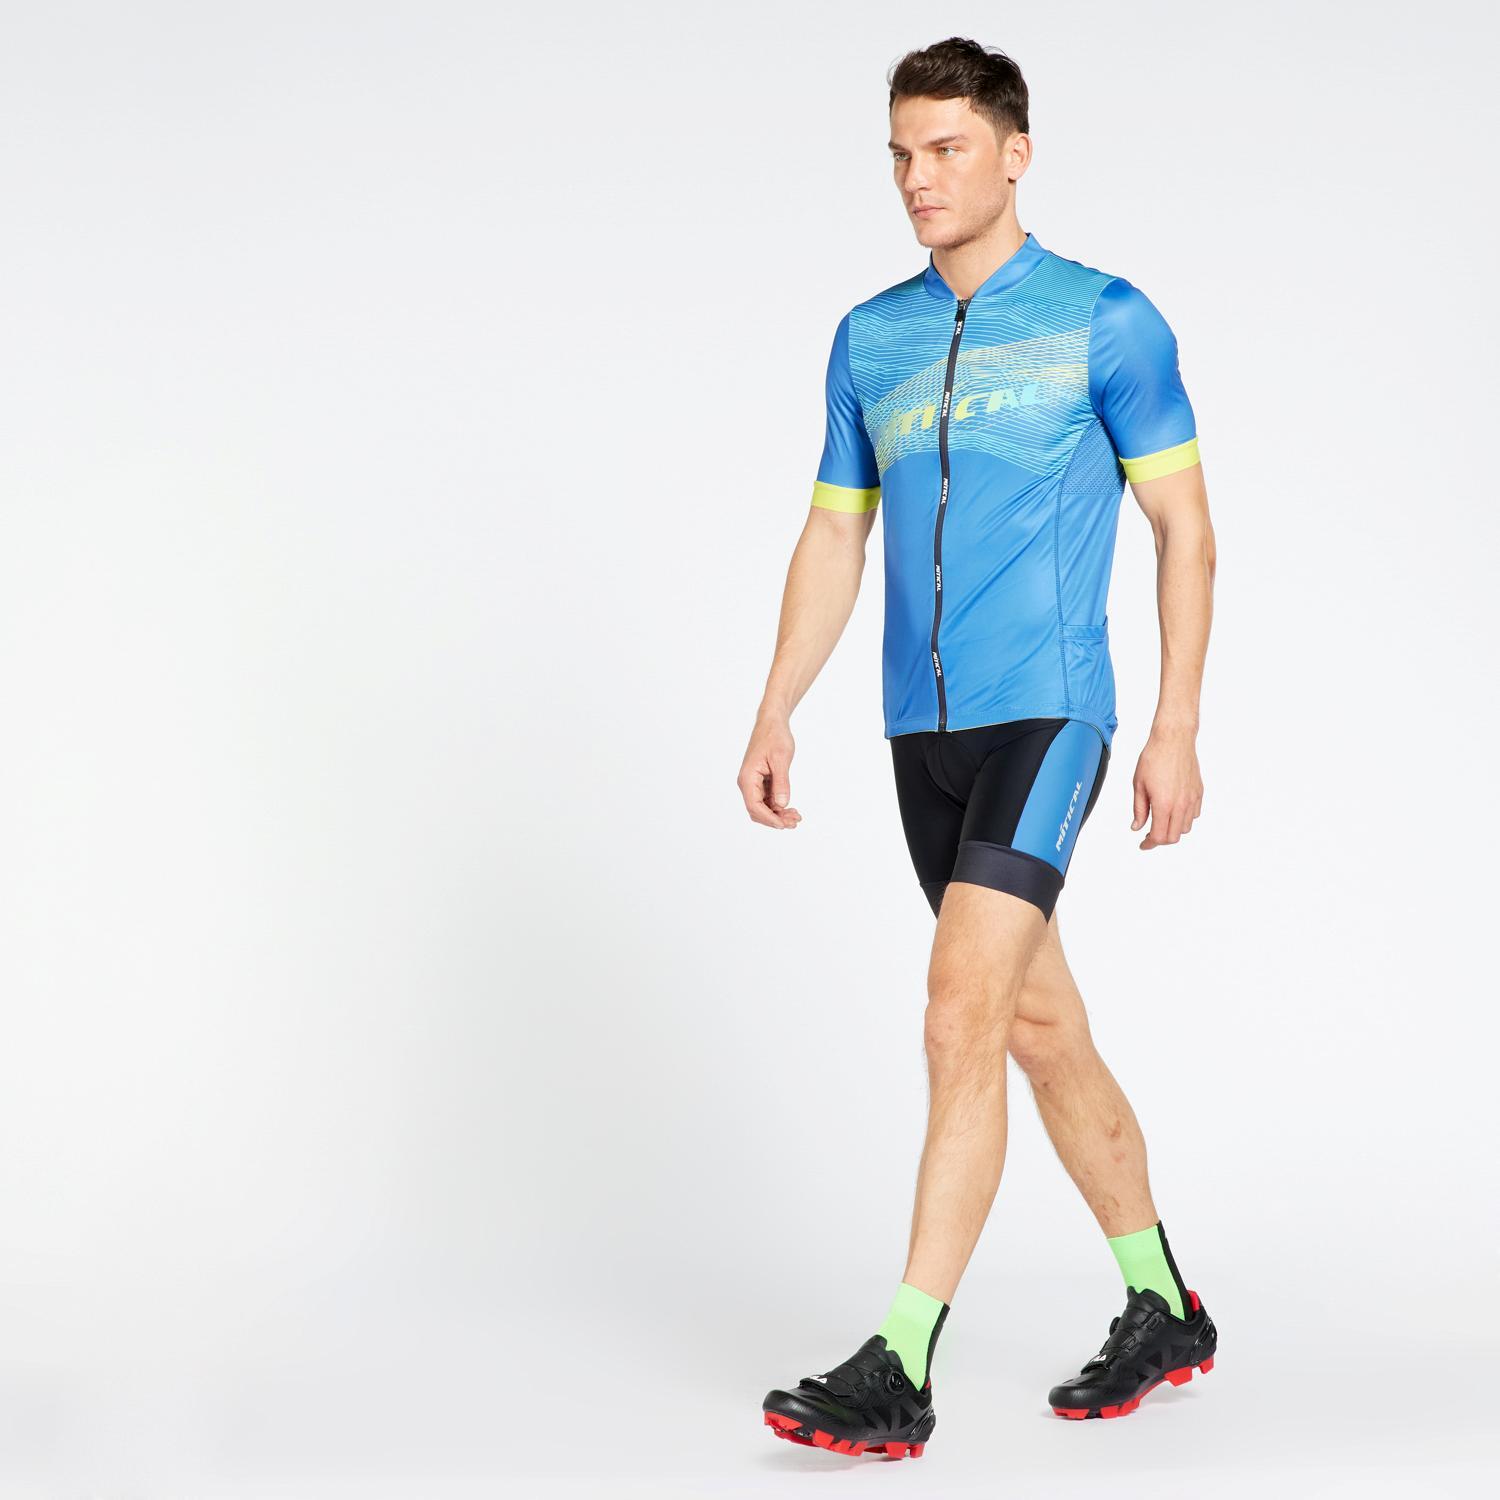 Mítical Oro - Bleu - Maillot Cyclisme Homme sports taille L